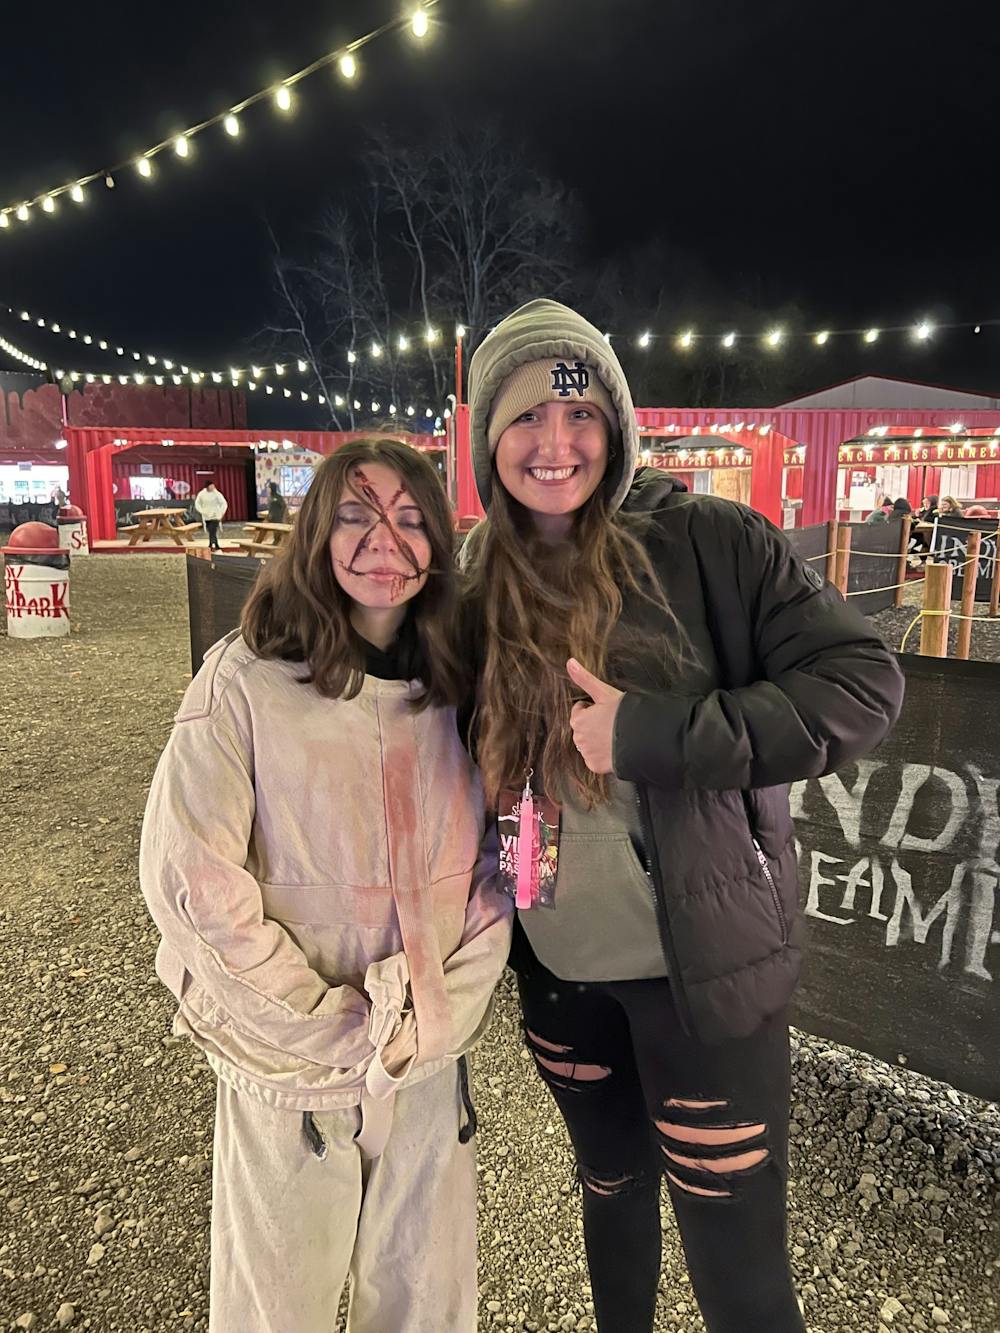 Indy Scream Park experience: frights and delights